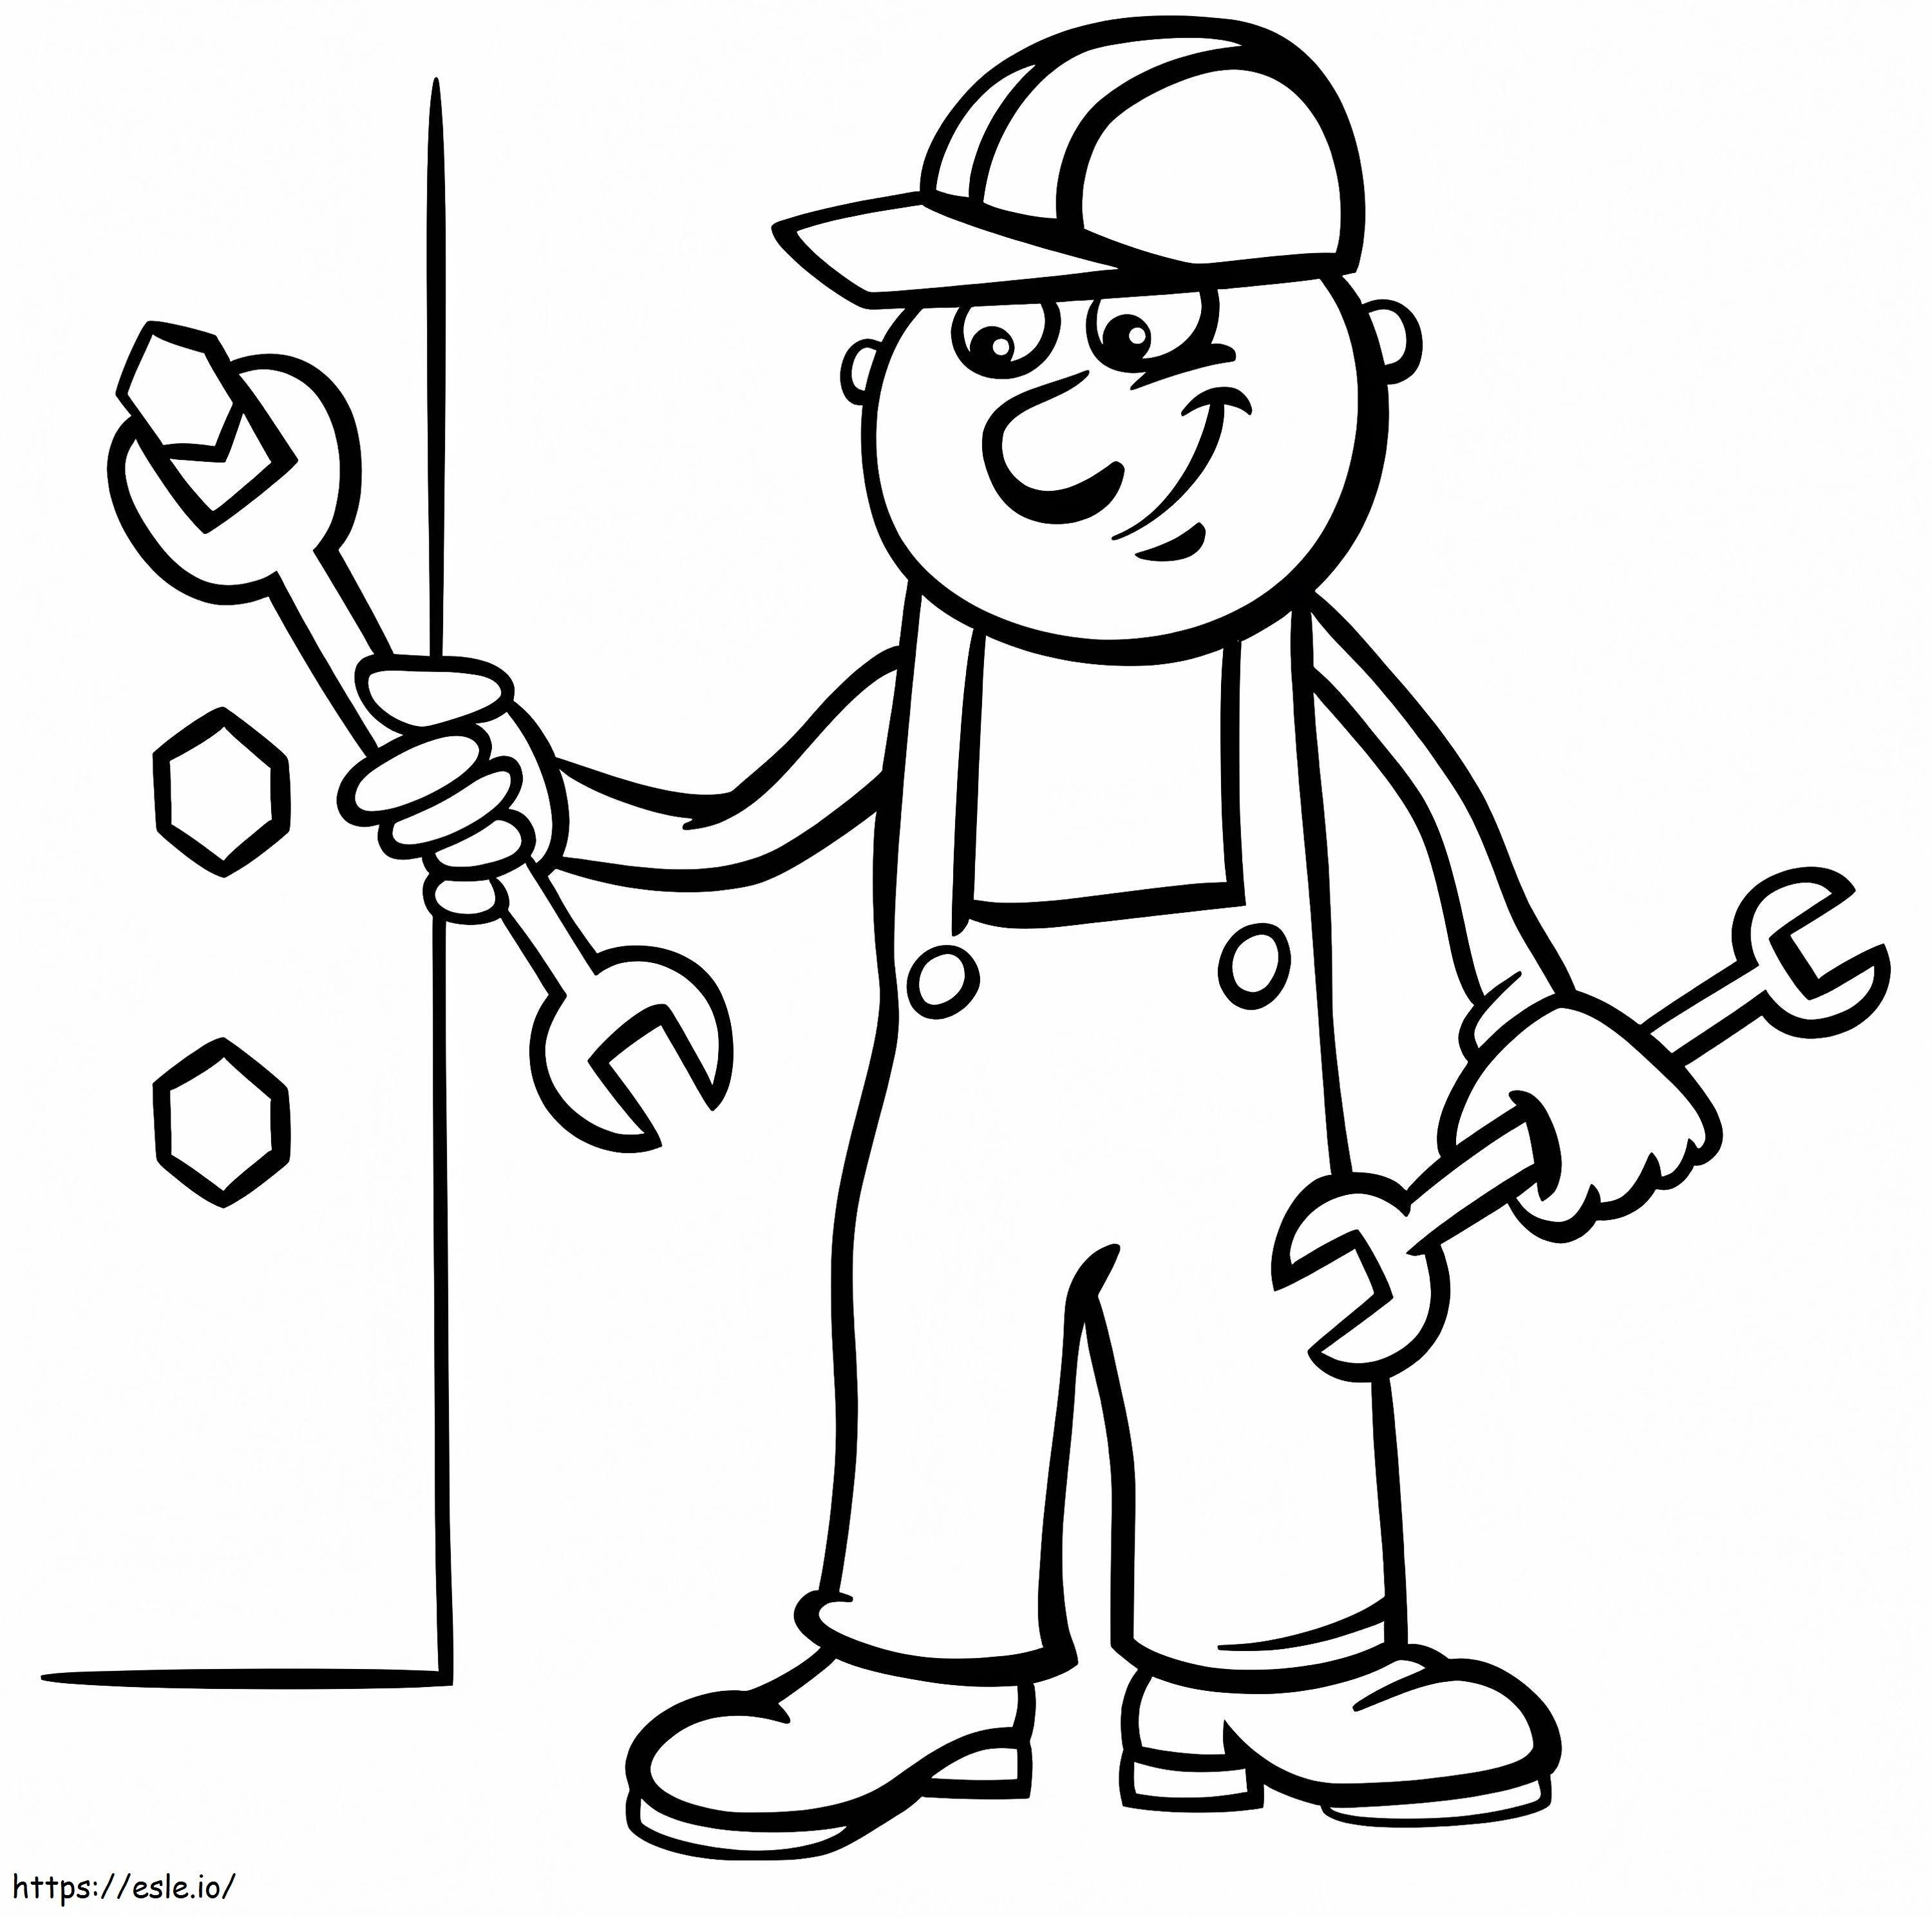 Mechanic 5 coloring page